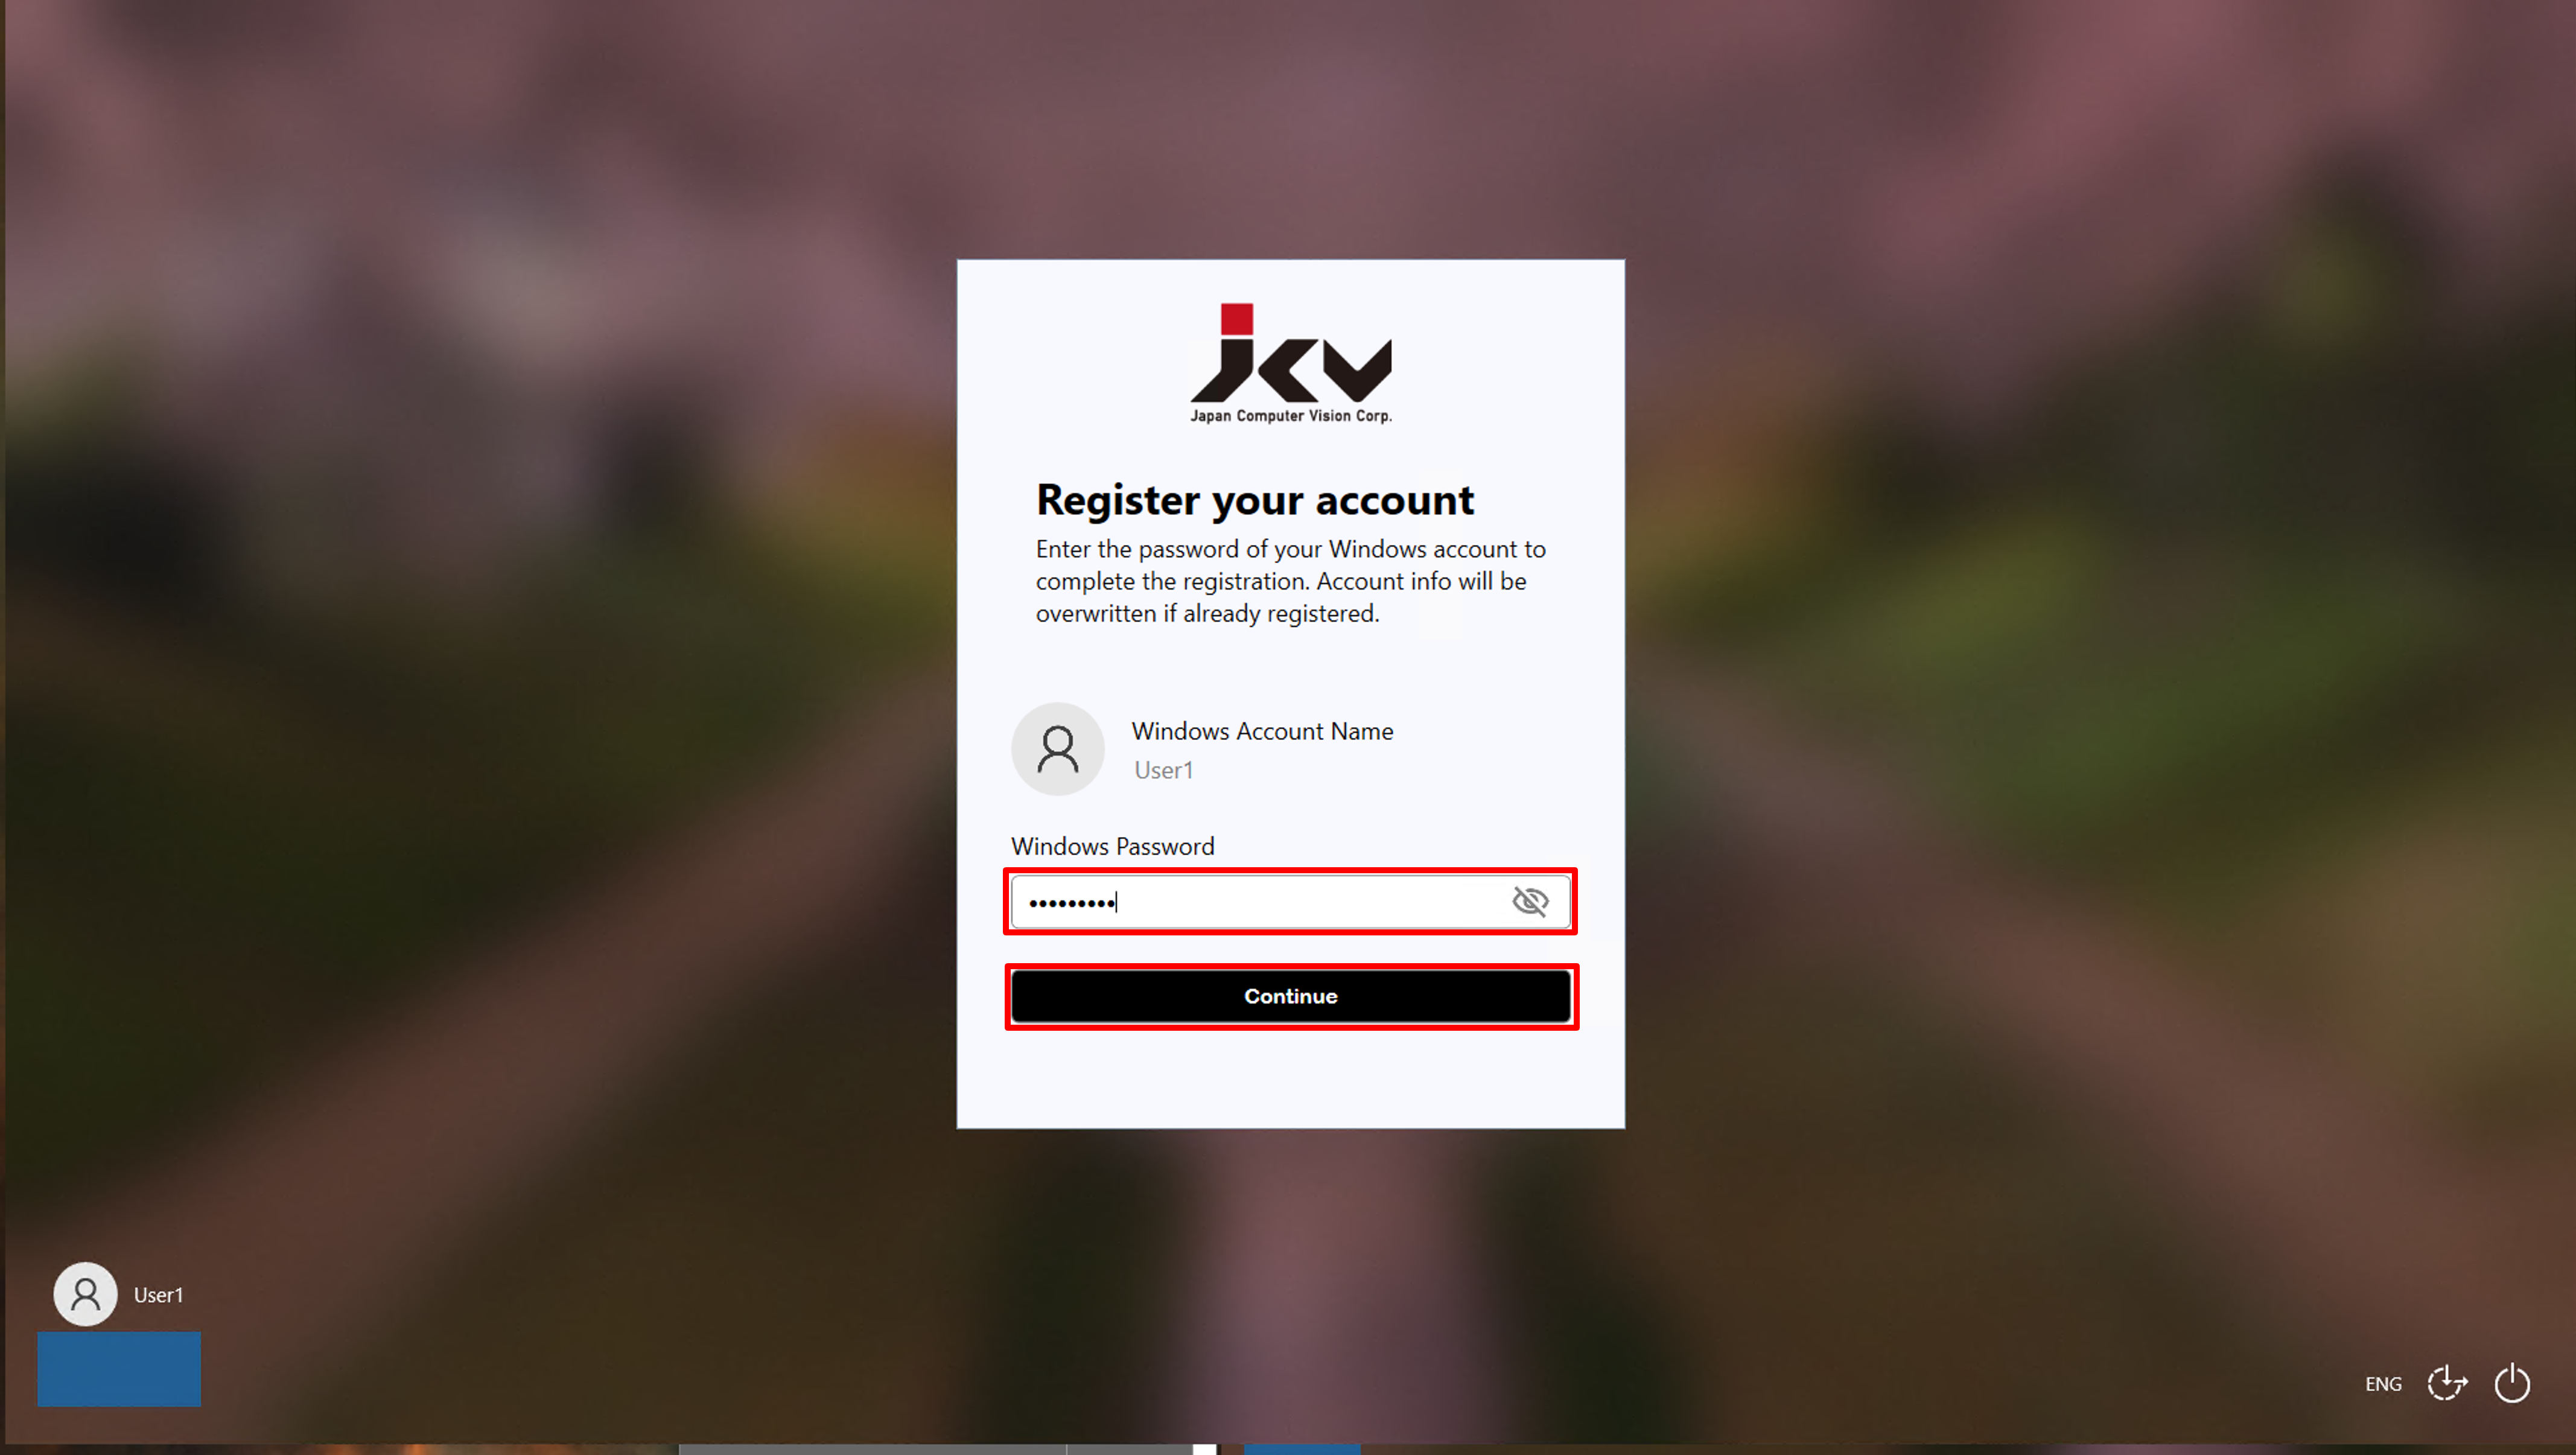 Register the account